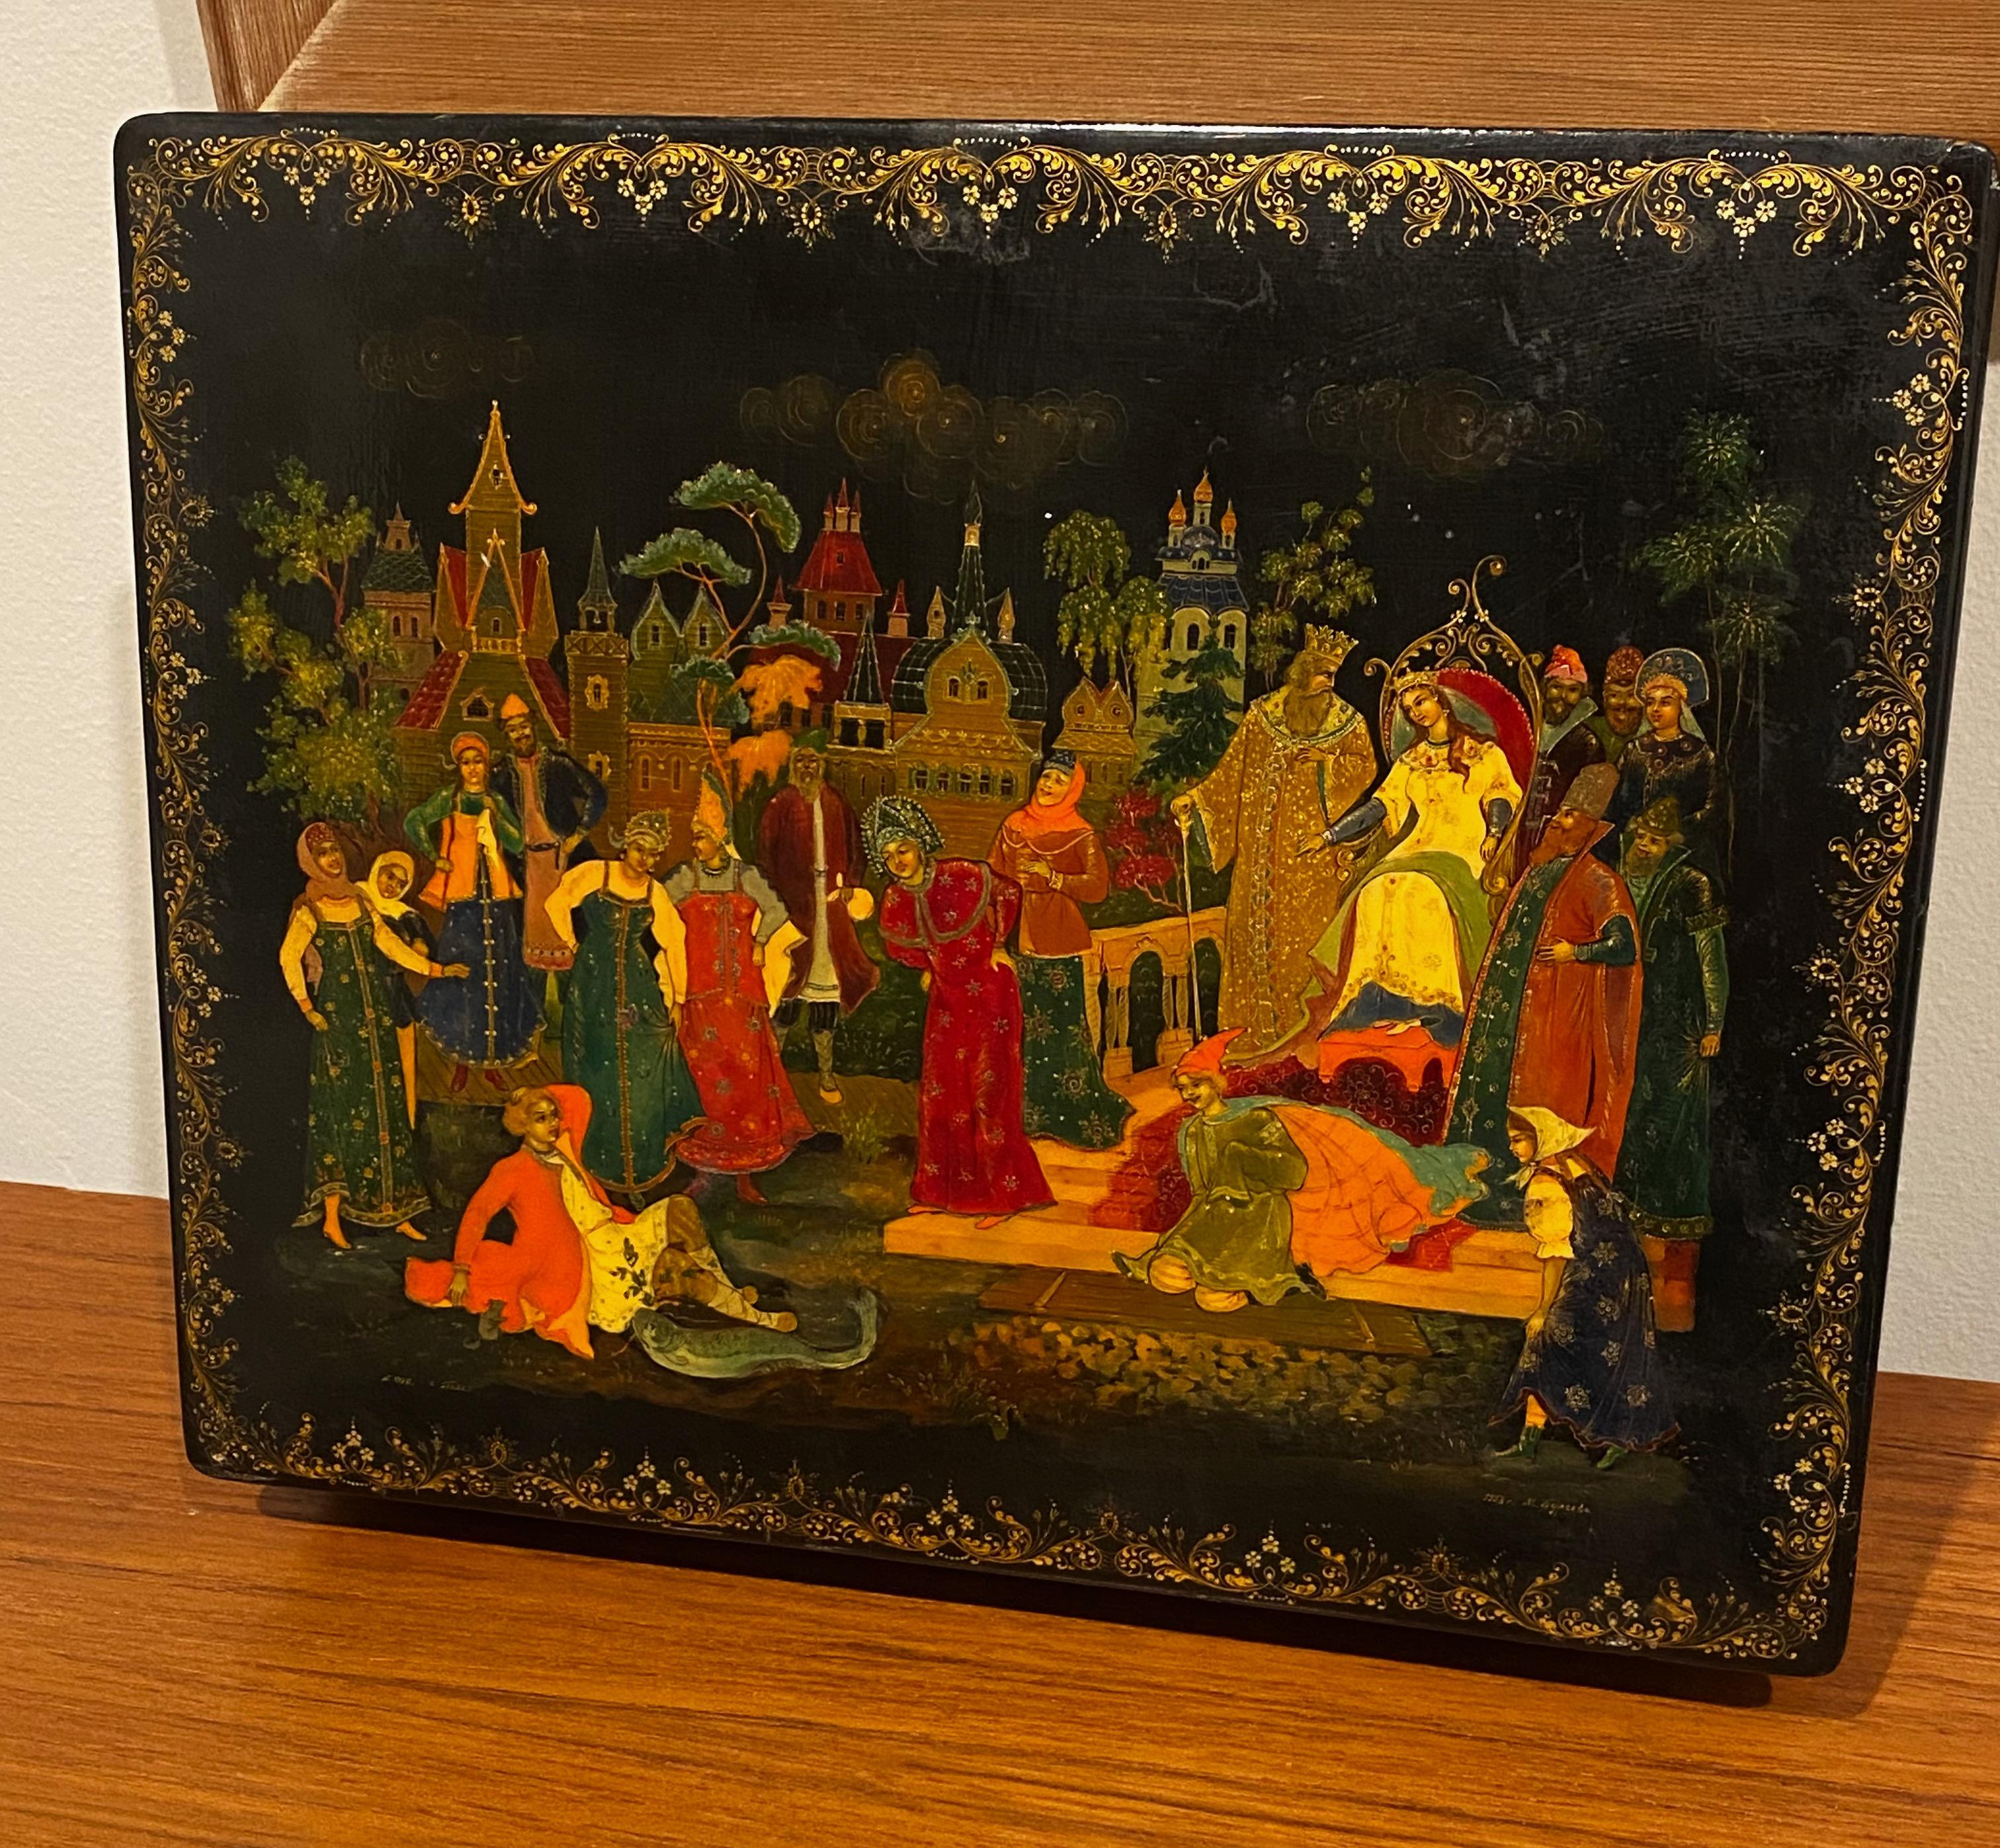 This Fine & Very Rare - 

due to its impressive size of  

27 cm (W) x 7 cm (H) x 21.5 cm (D) - 

Vintage Russian Lacquer Box 

is also called deed box (casket) or 